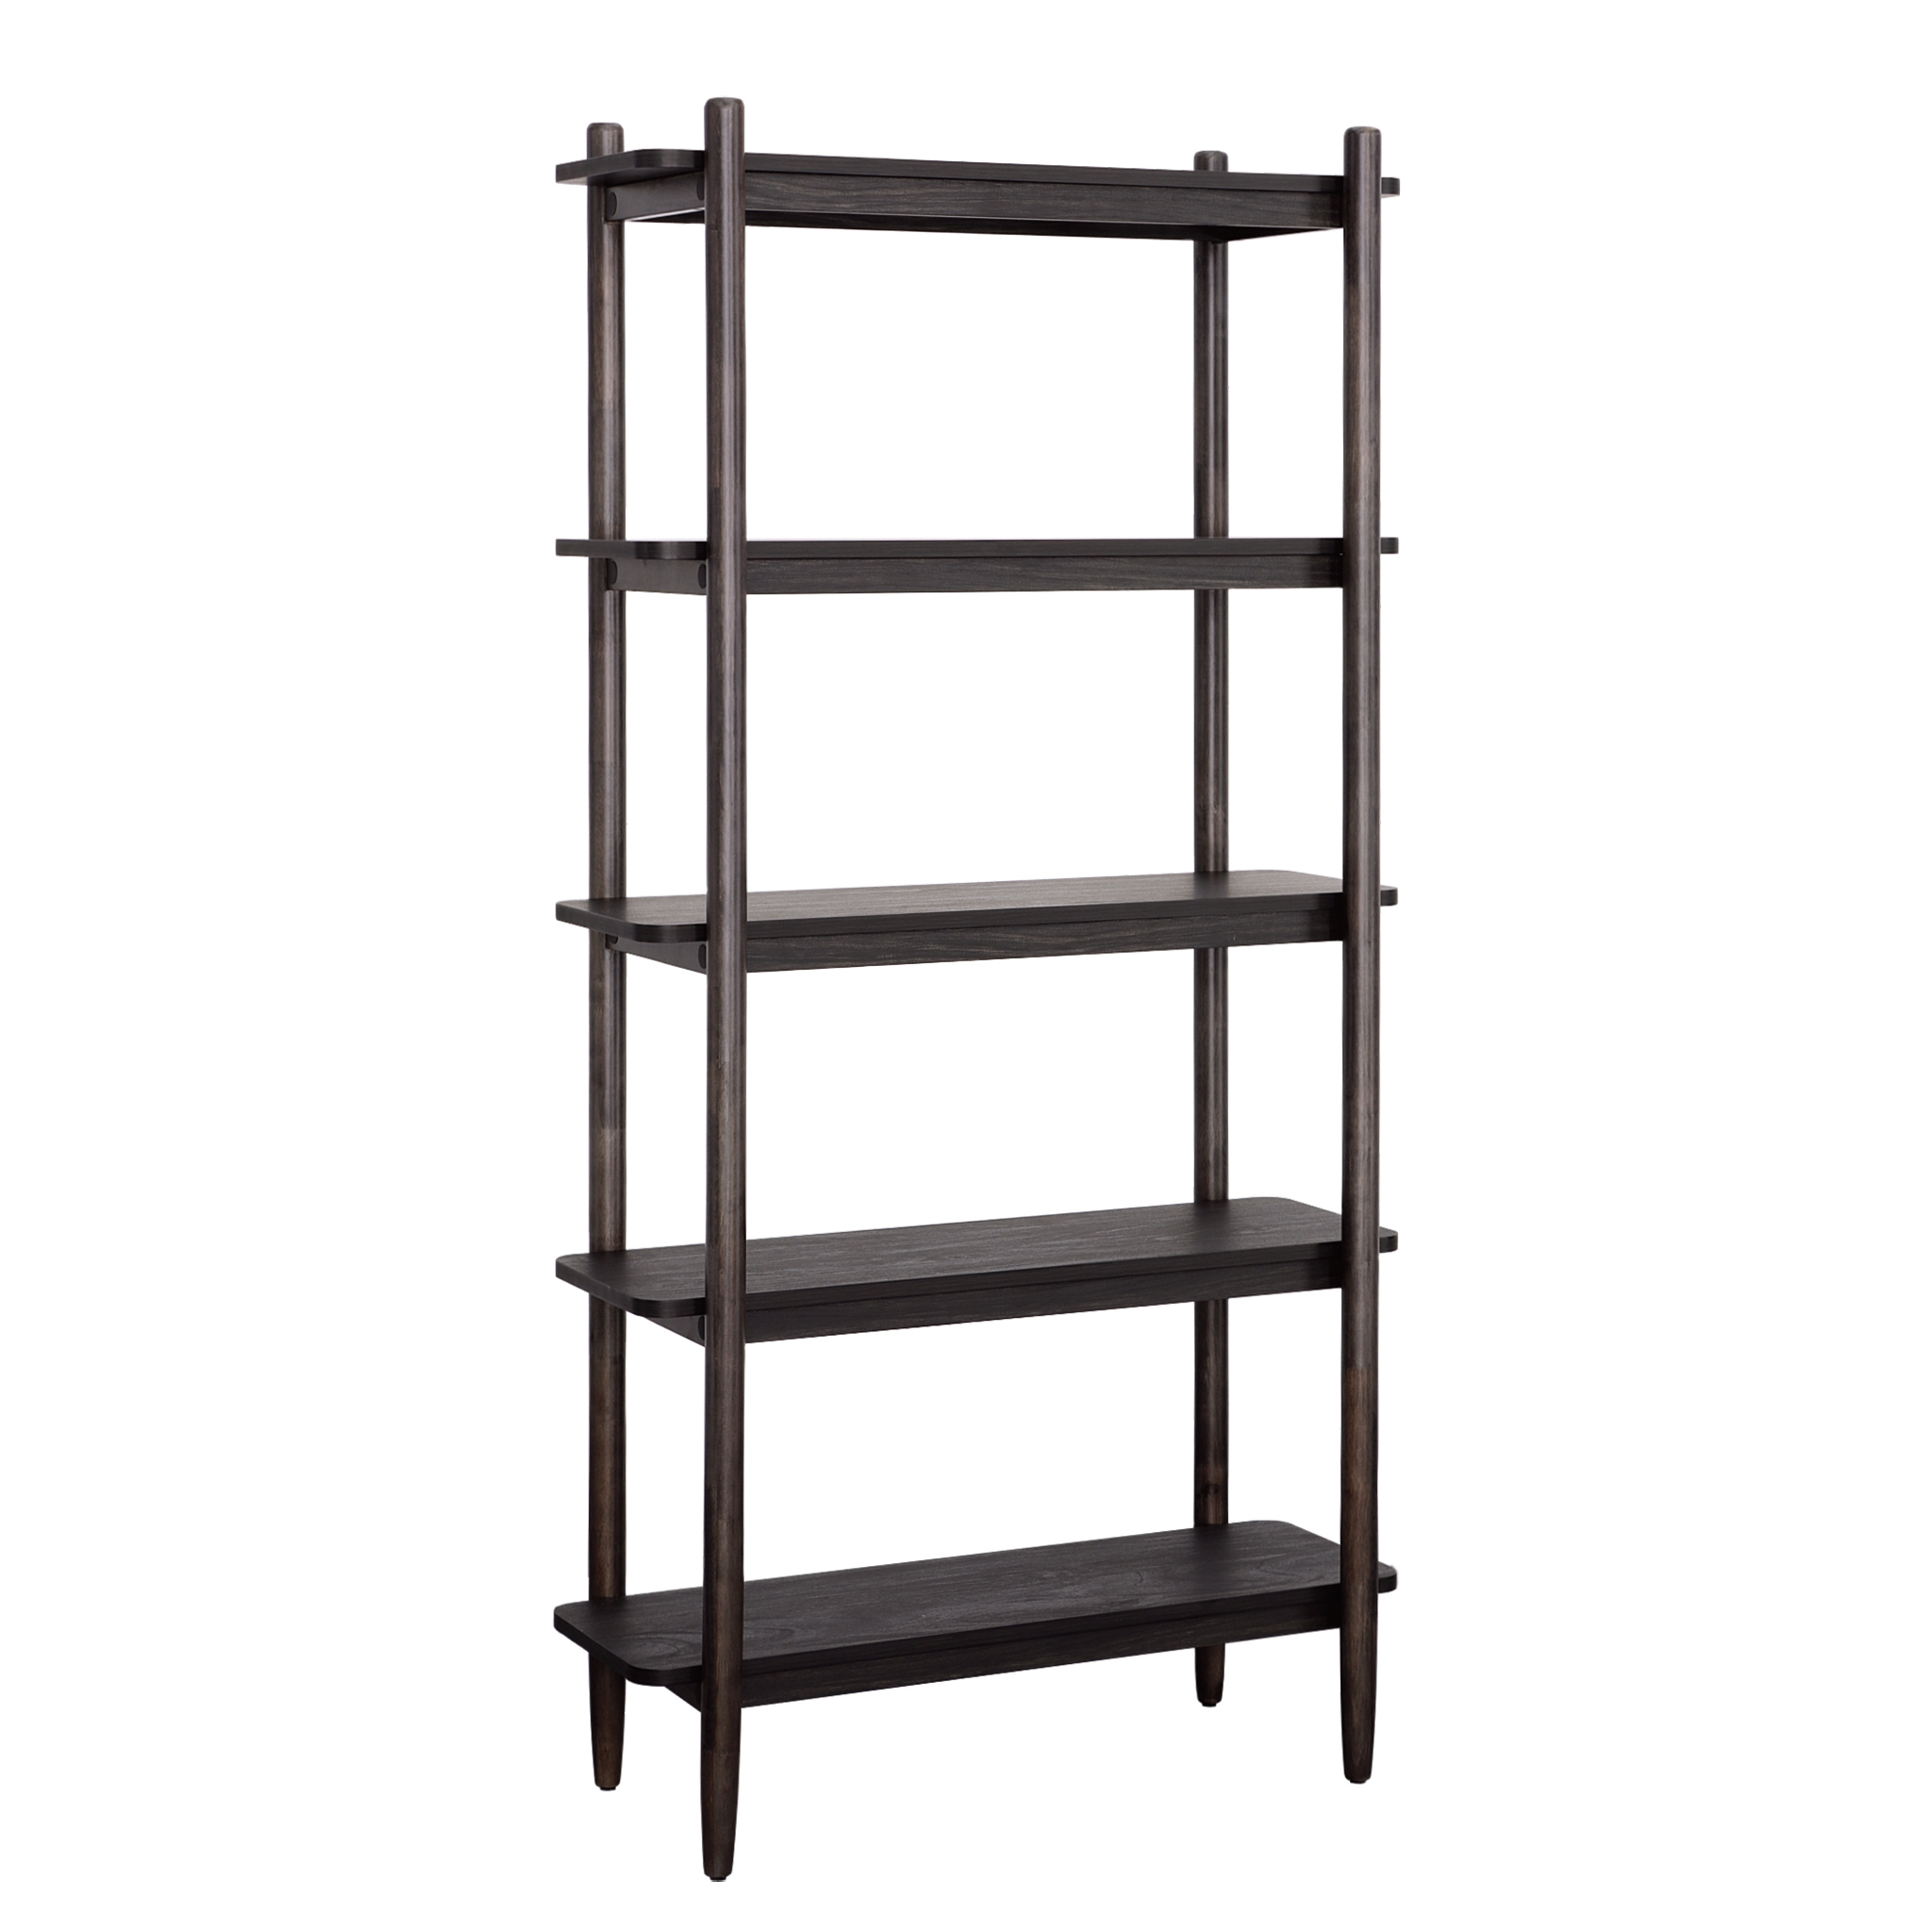 Better Homes & Gardens Springwood 5 Shelf Bookcase with Solid Wood Frame, Charcoal Finish - image 5 of 10